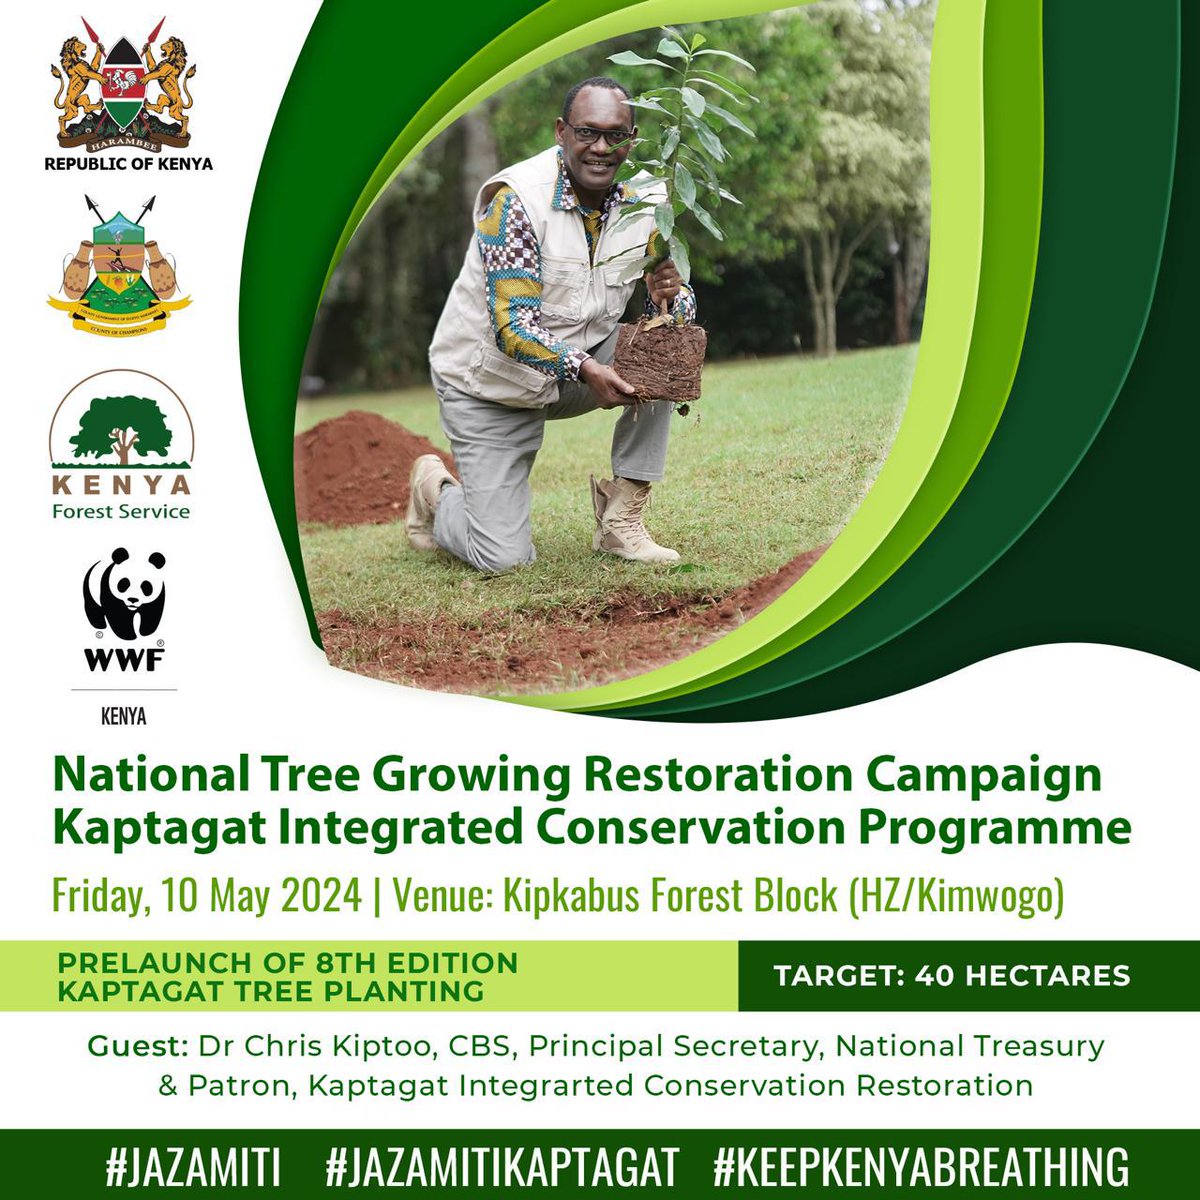 Today CS Prof Njuguna Ndung’u and PS @Kiptoock join other Kenyans in the #treeplanting exercise, which aligns with both the national and global need to fight #climatechange and boost our #forestcover. Safeguarding the health & sustainability of our planet for future generations